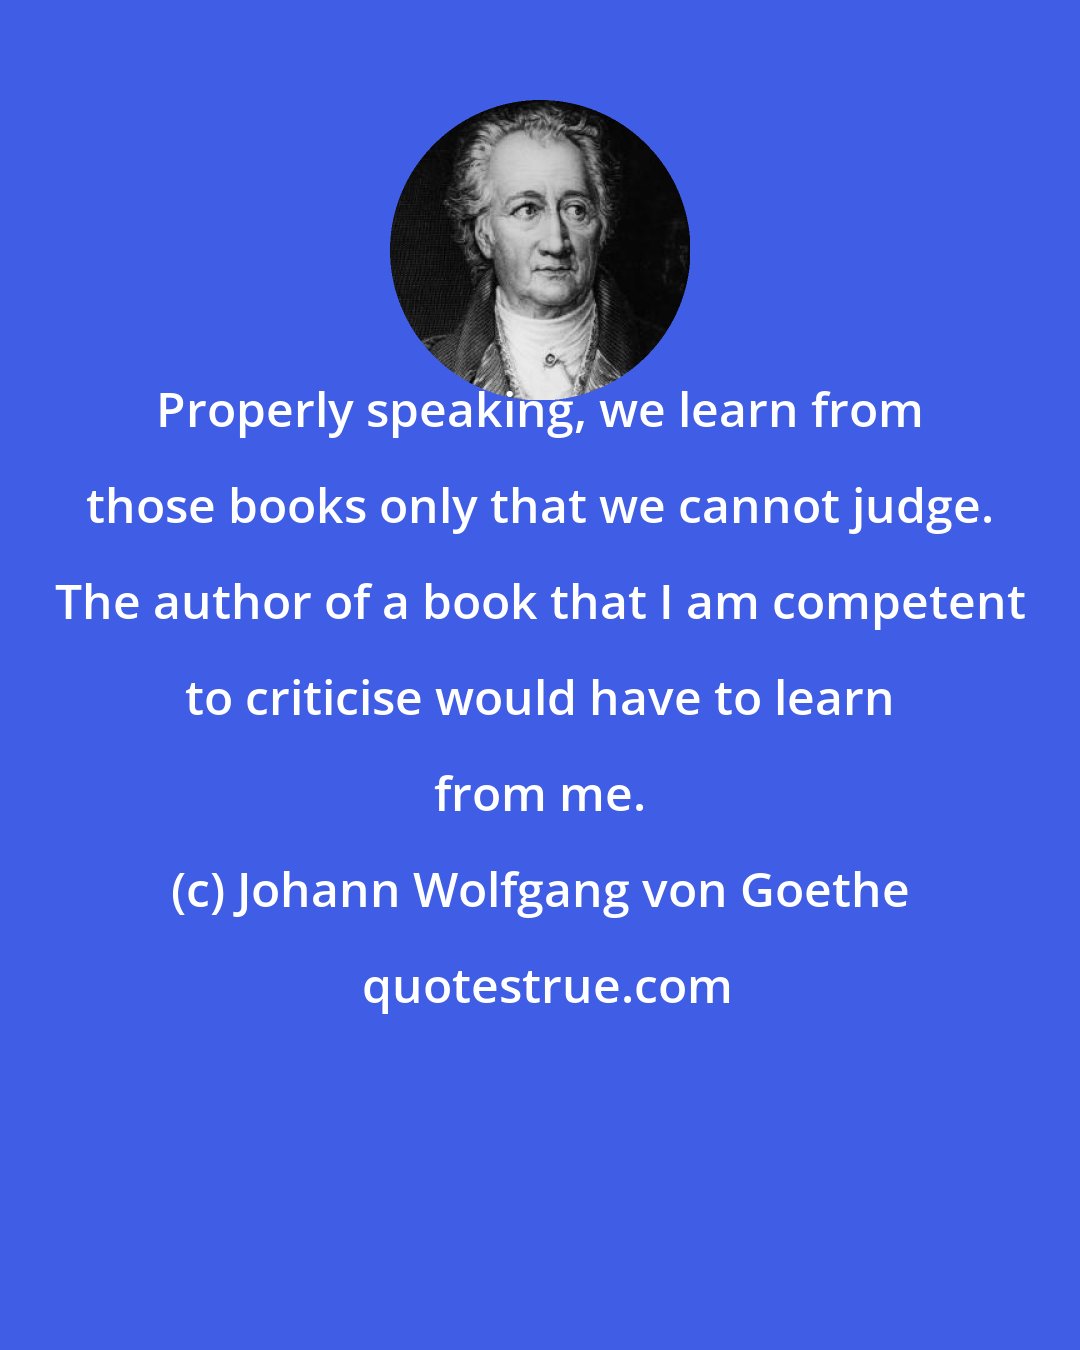 Johann Wolfgang von Goethe: Properly speaking, we learn from those books only that we cannot judge. The author of a book that I am competent to criticise would have to learn from me.